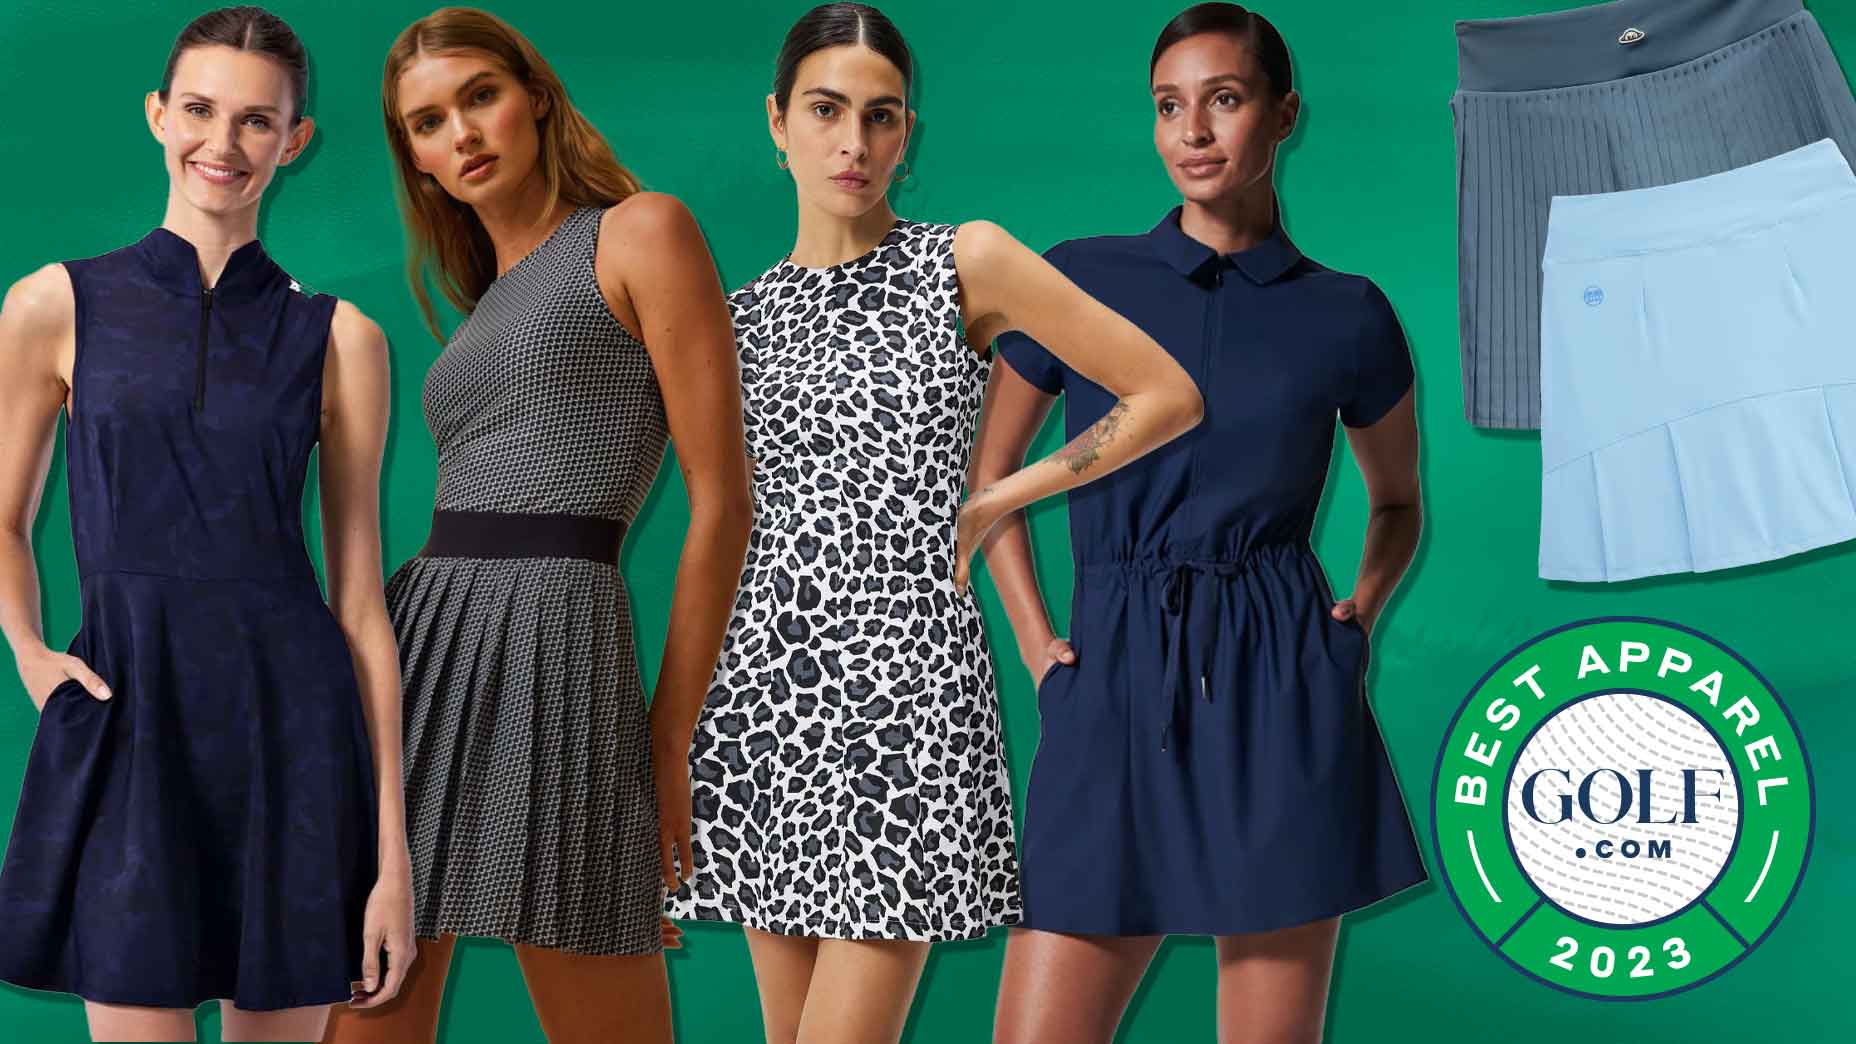 Womens golf dresses and skirts on models